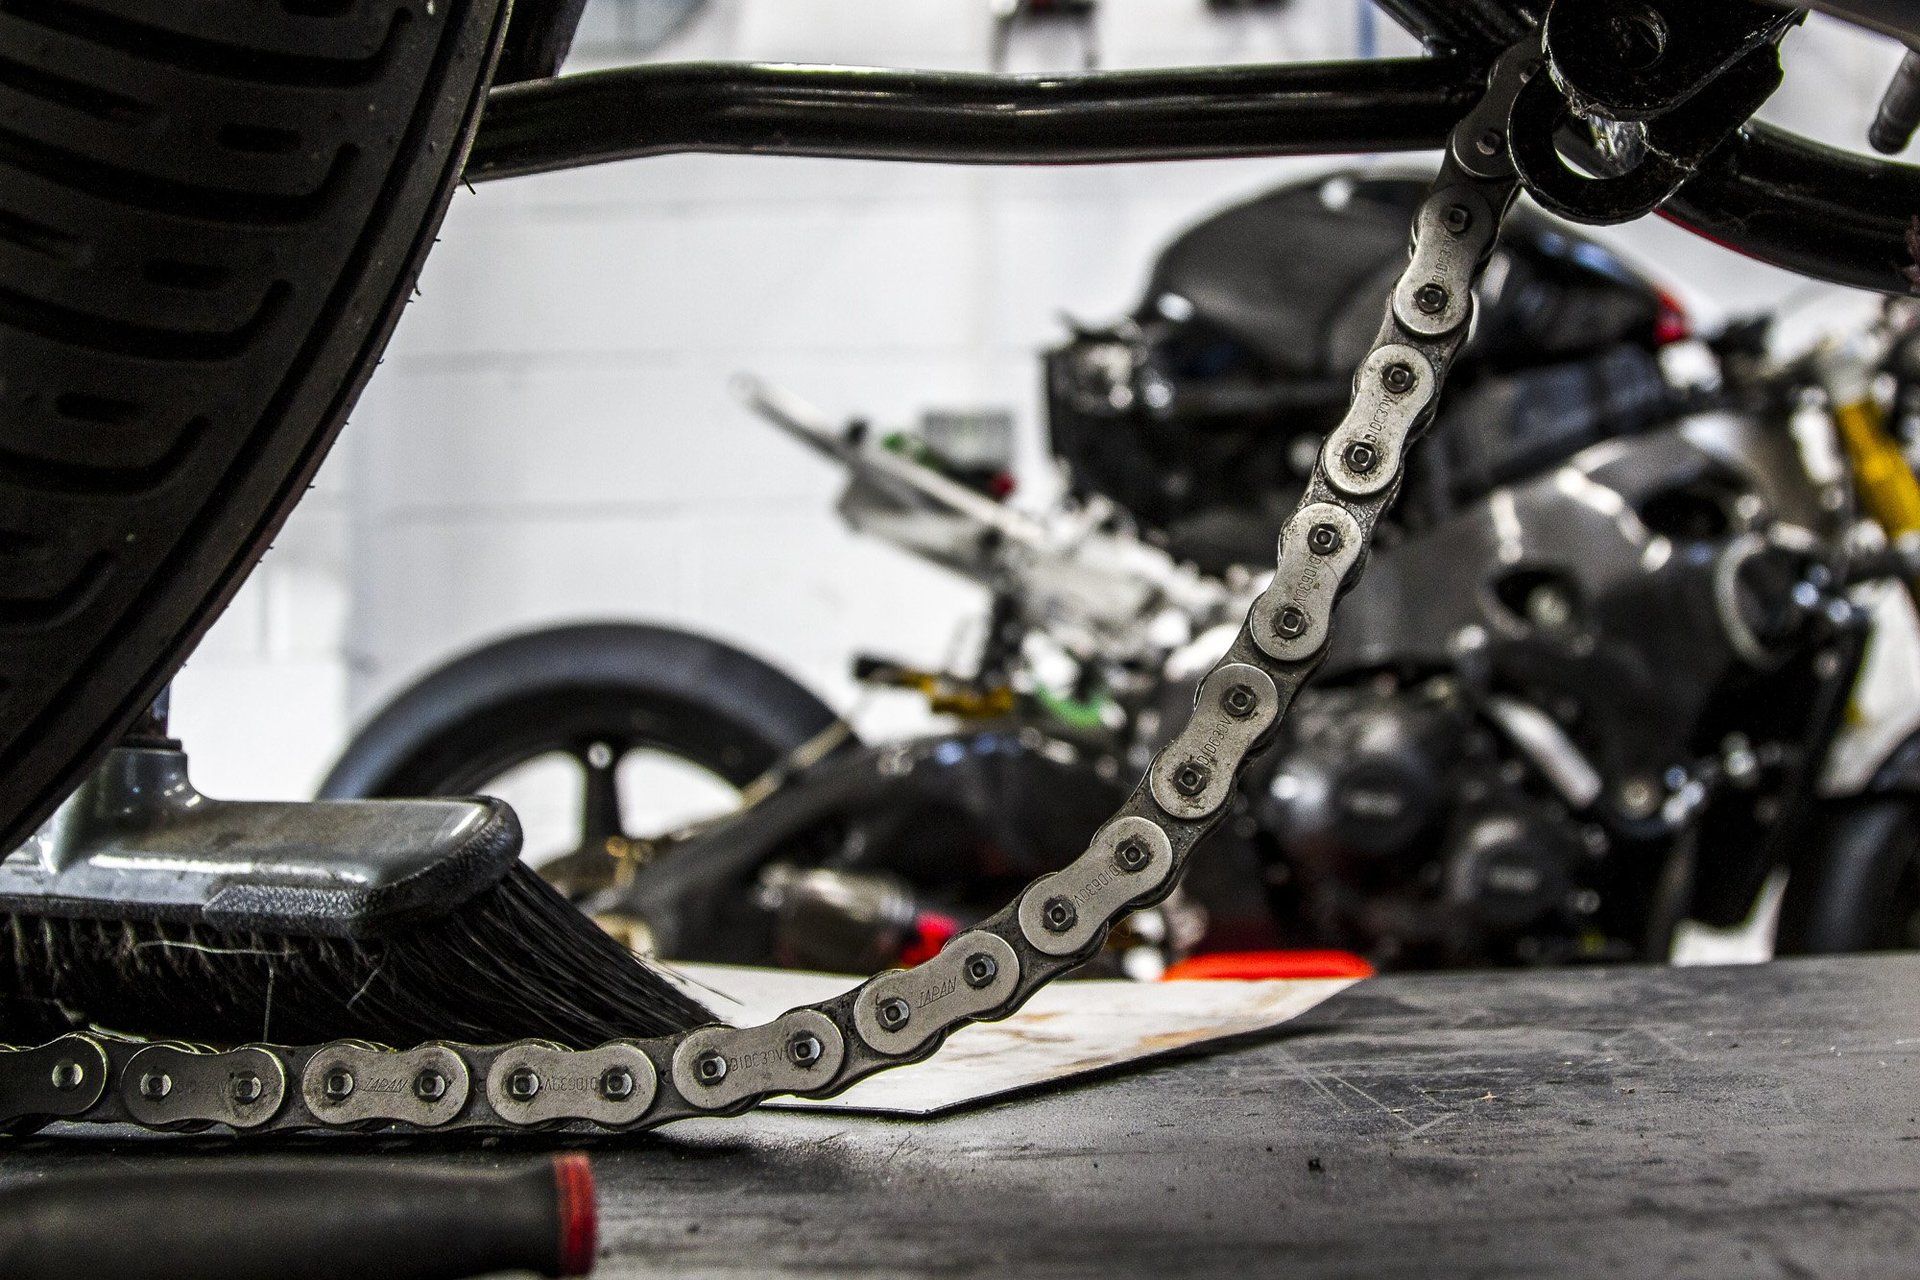 5 top tips for keeping your motorcycle tip top in winter